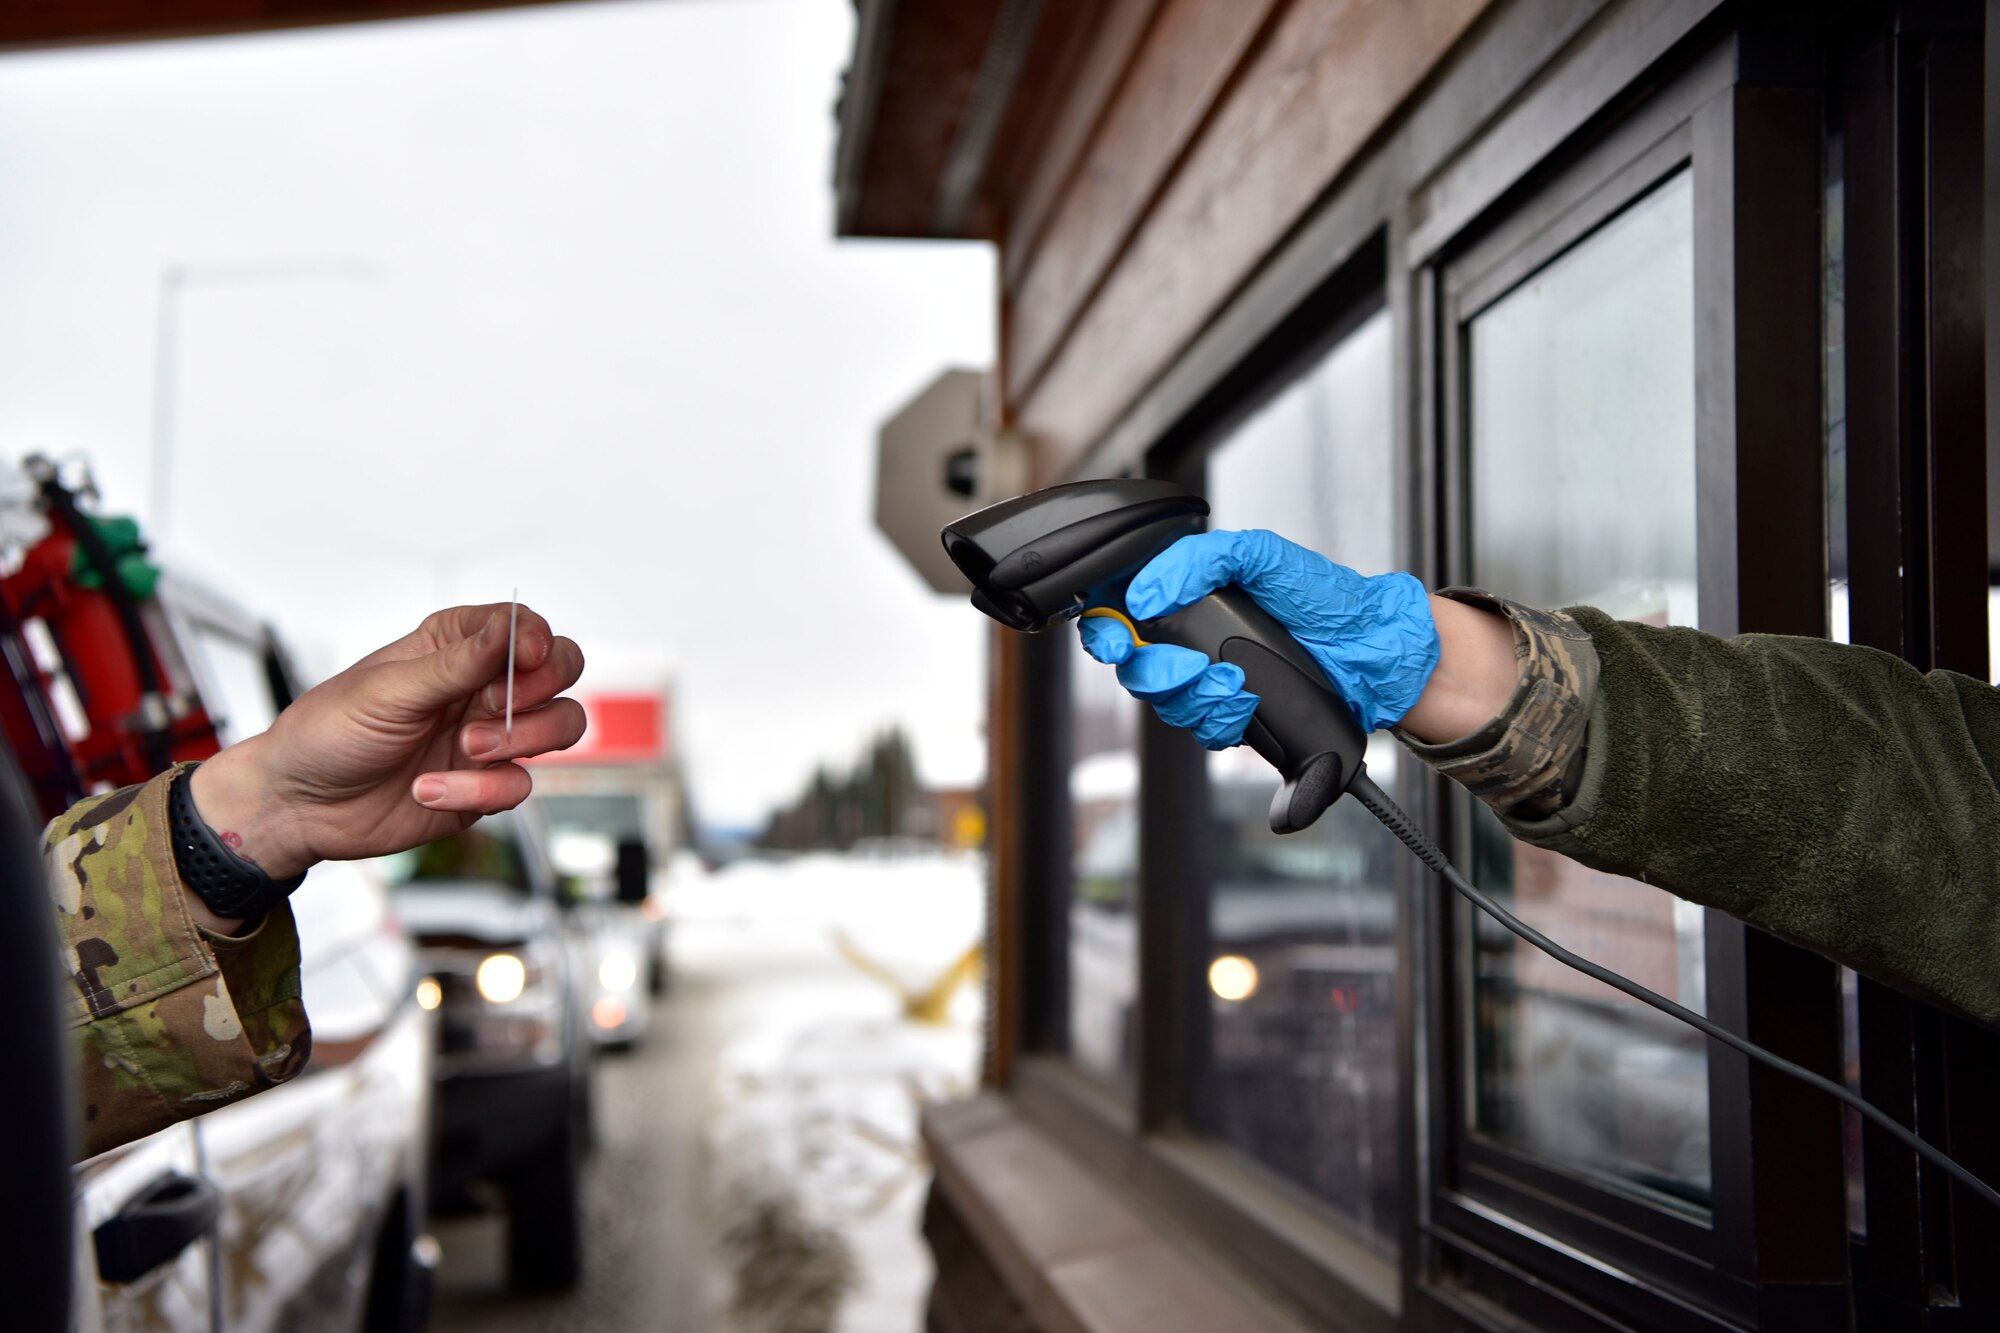 A 354th Security Forces Squadron Airman scans a common access card on Eielson Air Force Base, Alaska, March 20, 2020. Installation personnel and visitors must present their I.D. to defenders at the main gate for verification. The change is one of many precautionary measures implemented base-wide to help prevent the spread of COVID-19. (U.S. Air Force photo by Senior Airman Beaux Hebert)